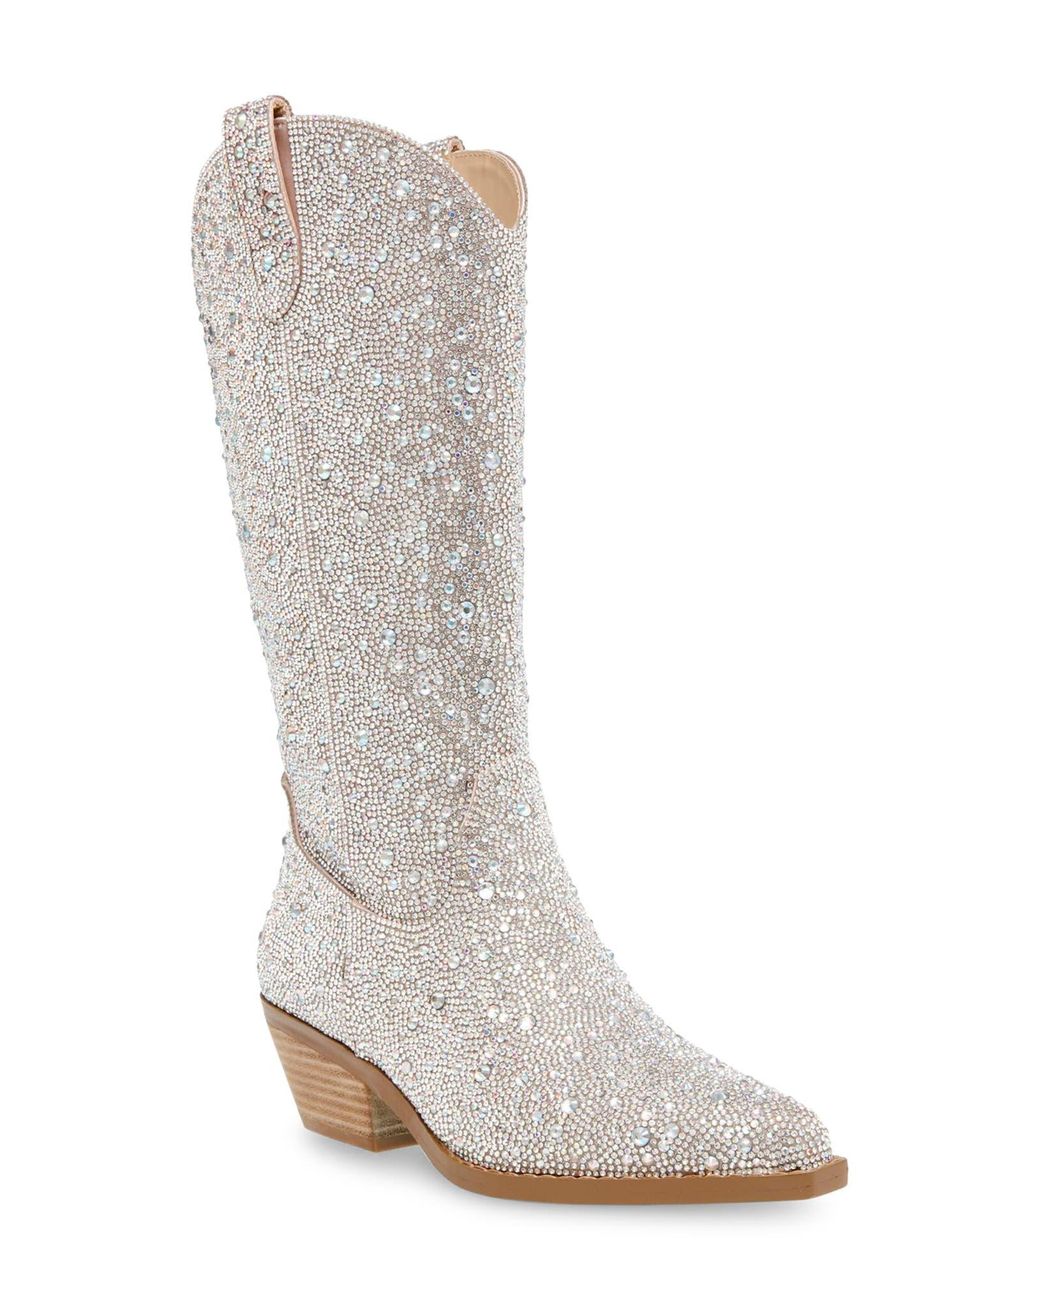 Betsey Johnson Dalas Embellished Western Boot in White | Lyst